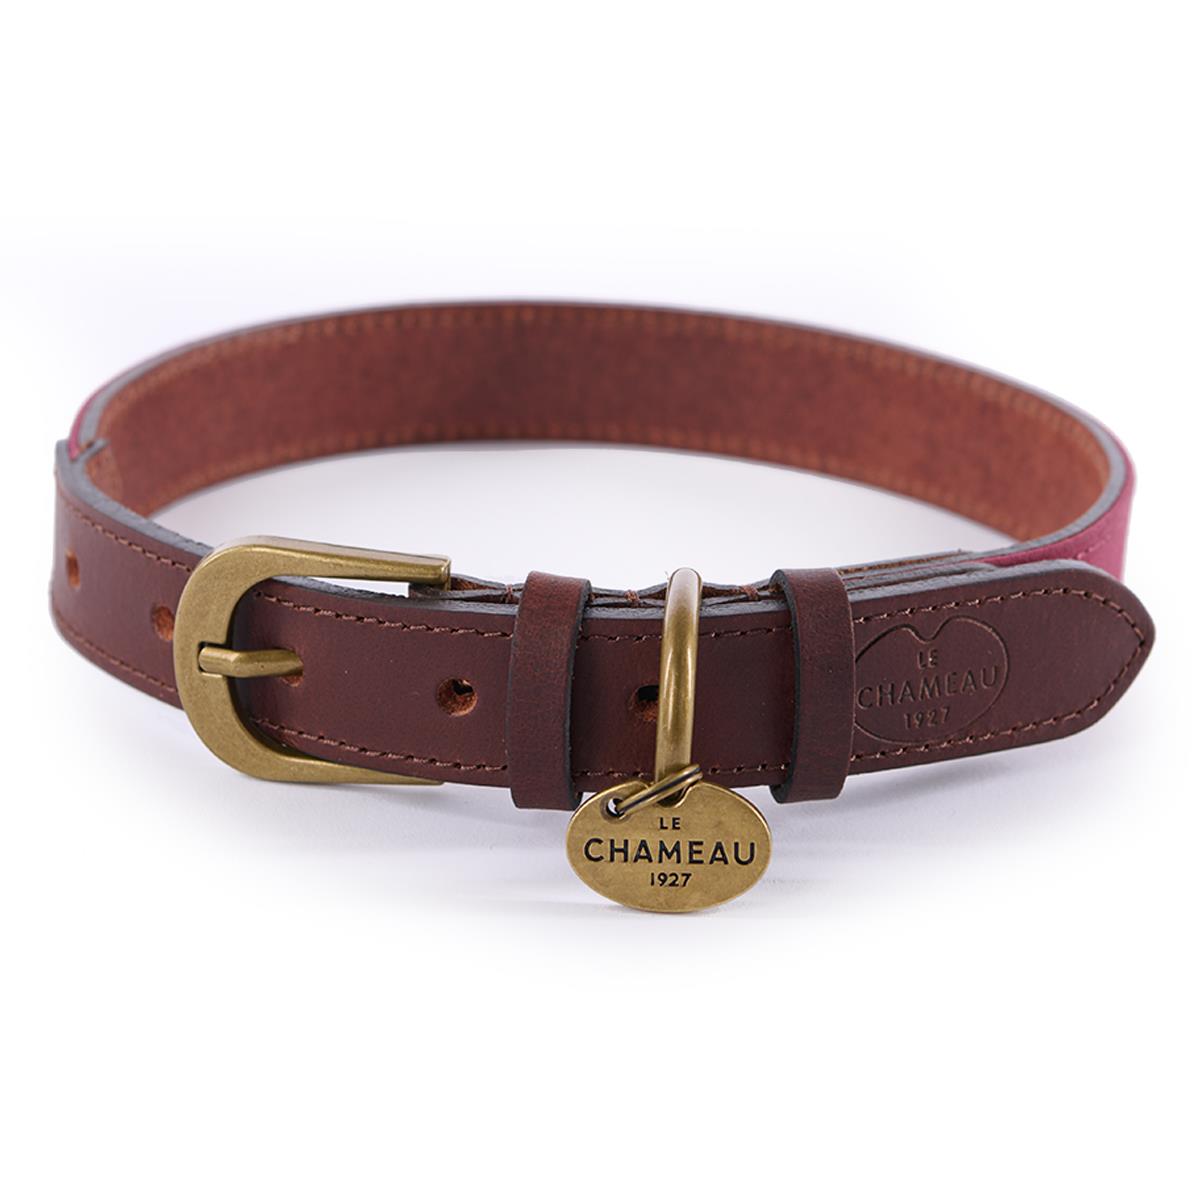 Le Chameau Waxed Cotton/Leather Dog Collar Questions & Answers